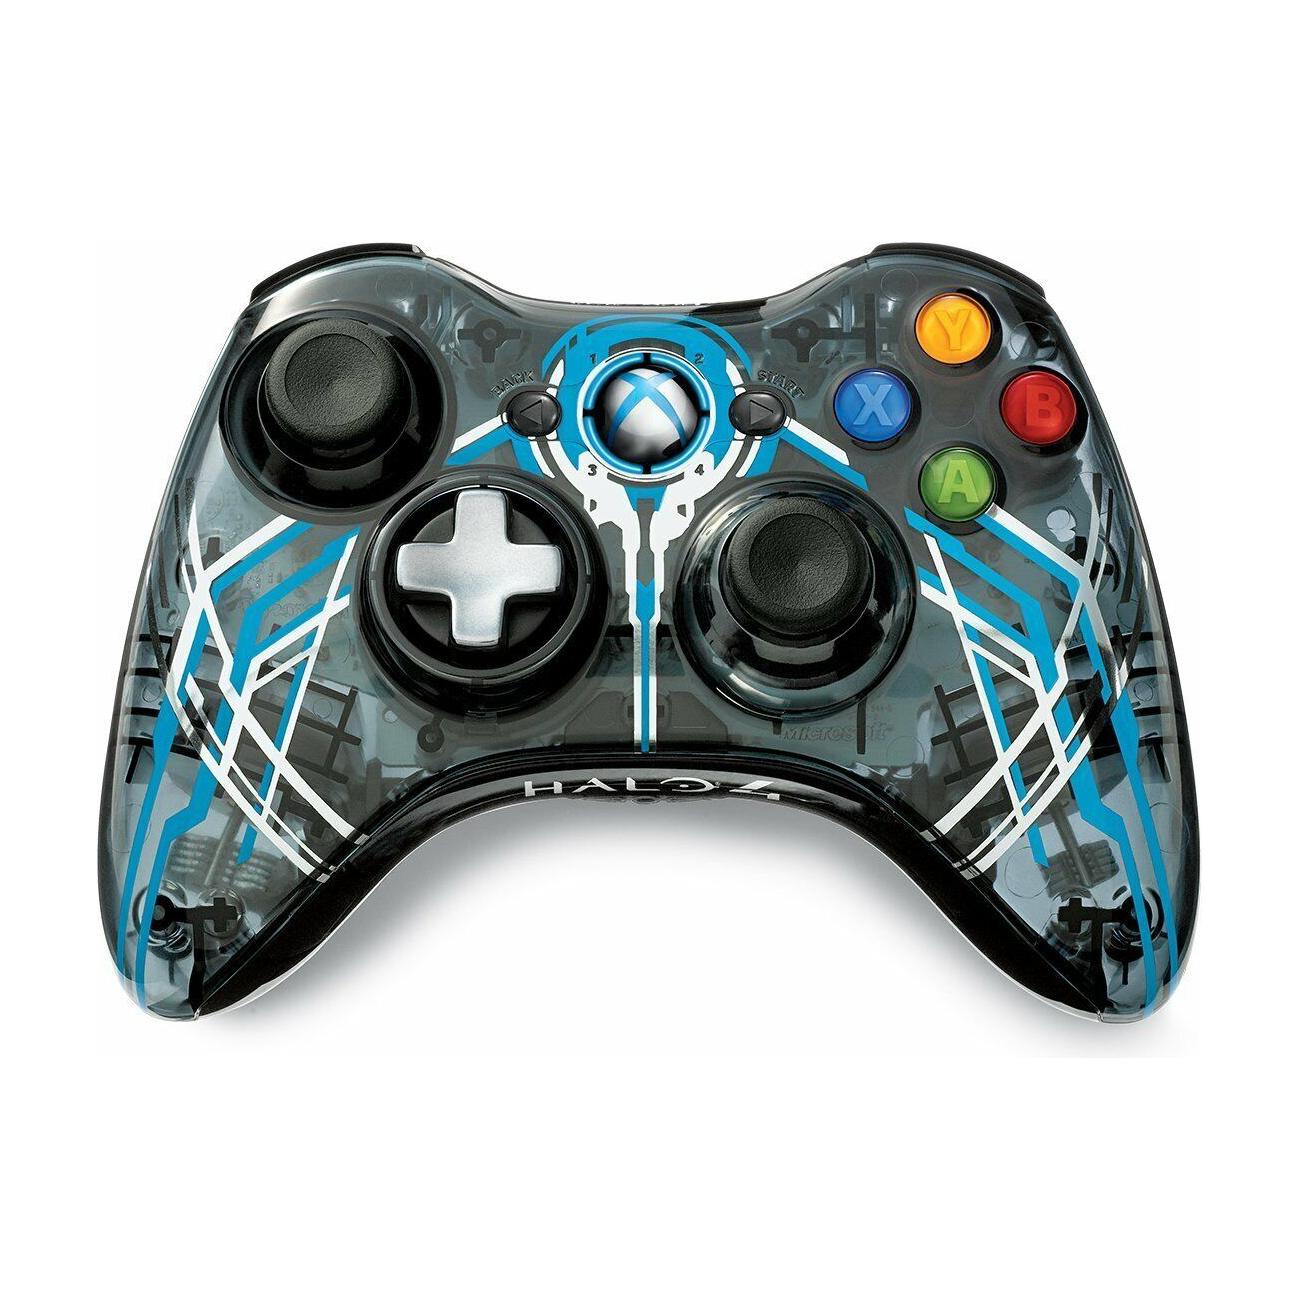 Official XBOX 360 Wireless Controller - Halo 4 Limited Edition